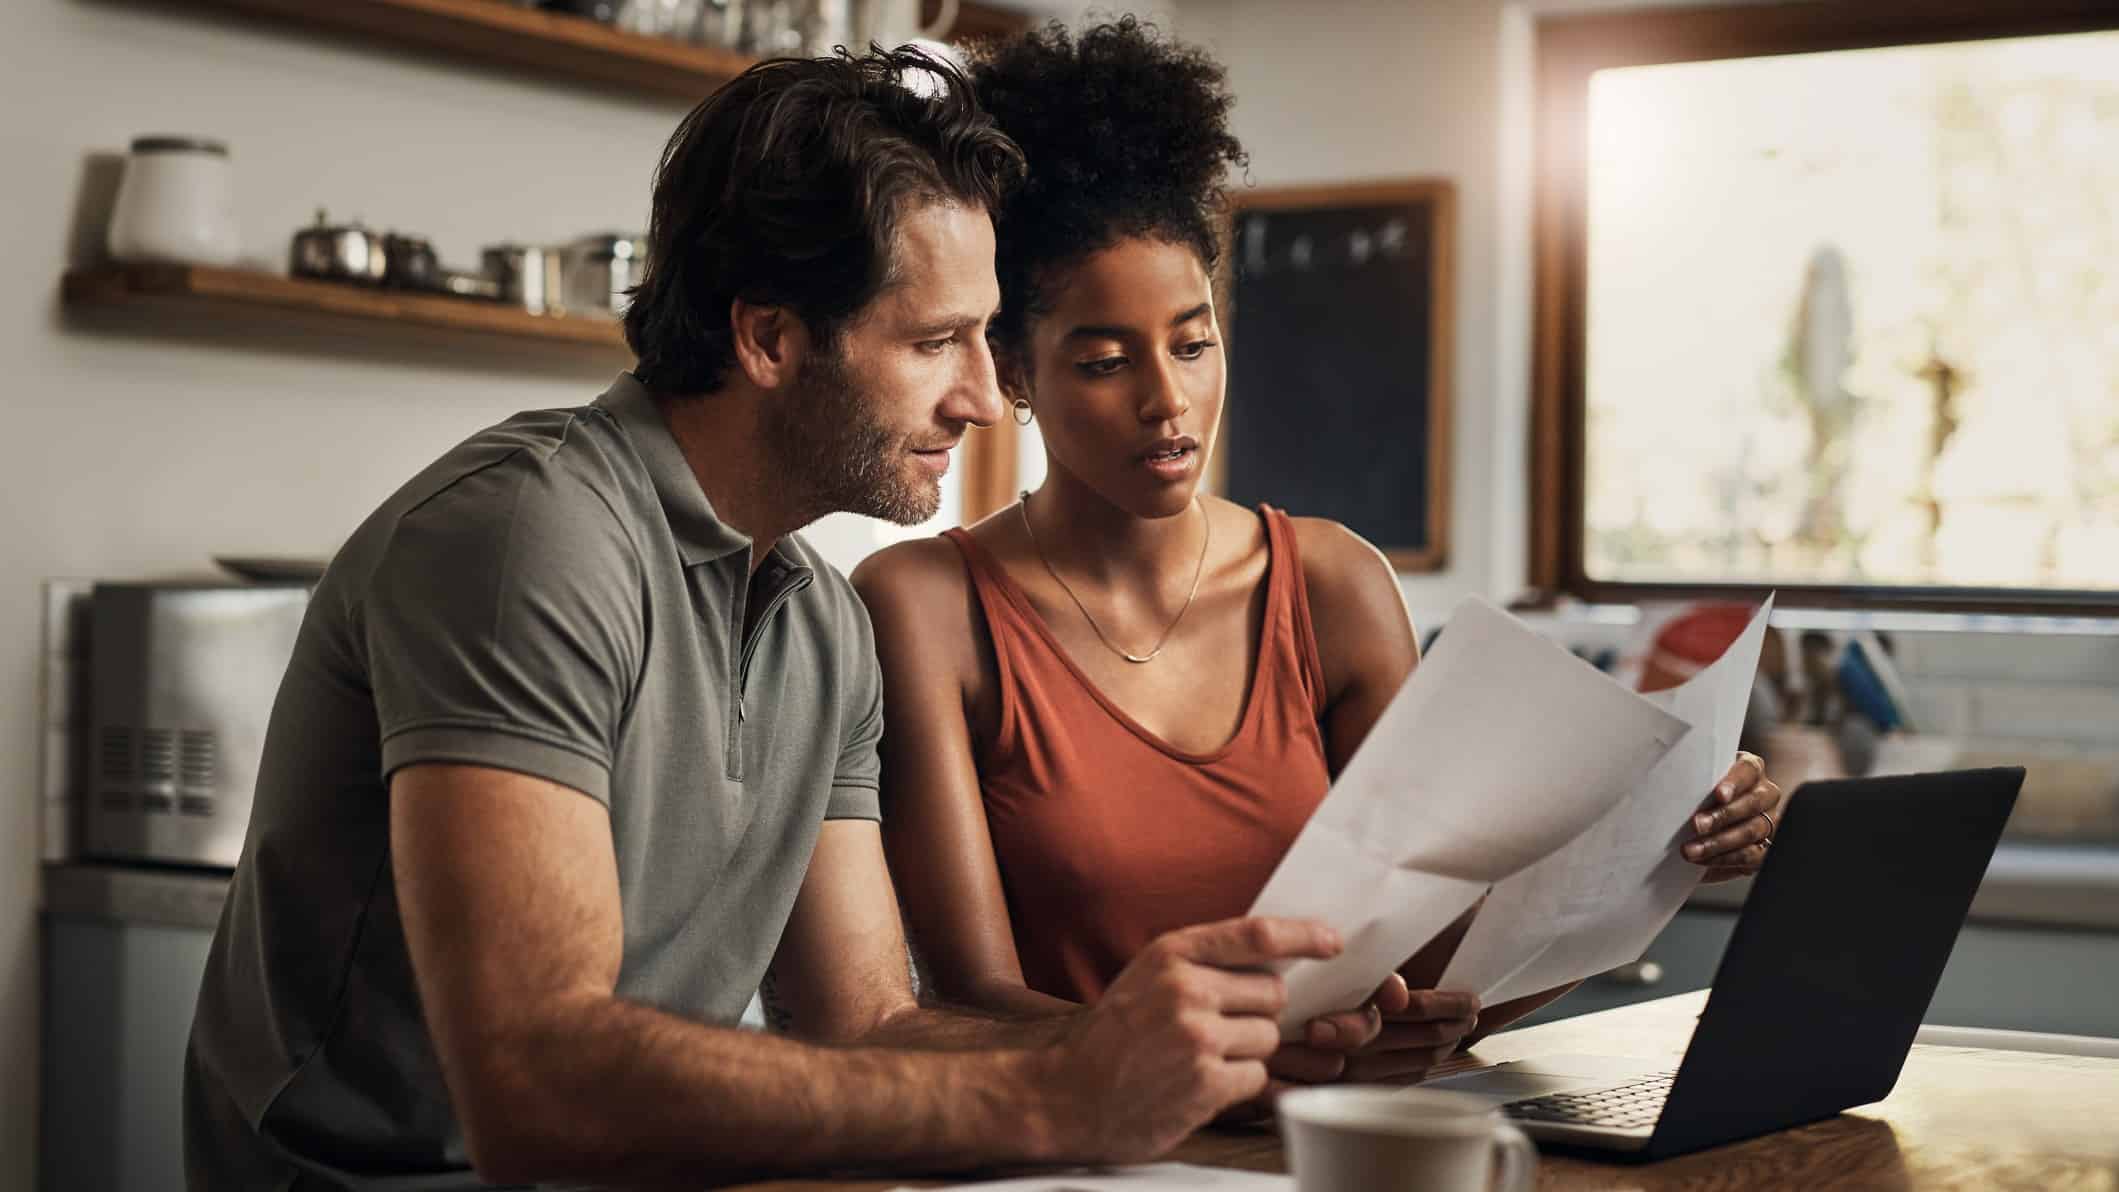 A young couple sits at their kitchen table looking at documents with a laptop open in front of them